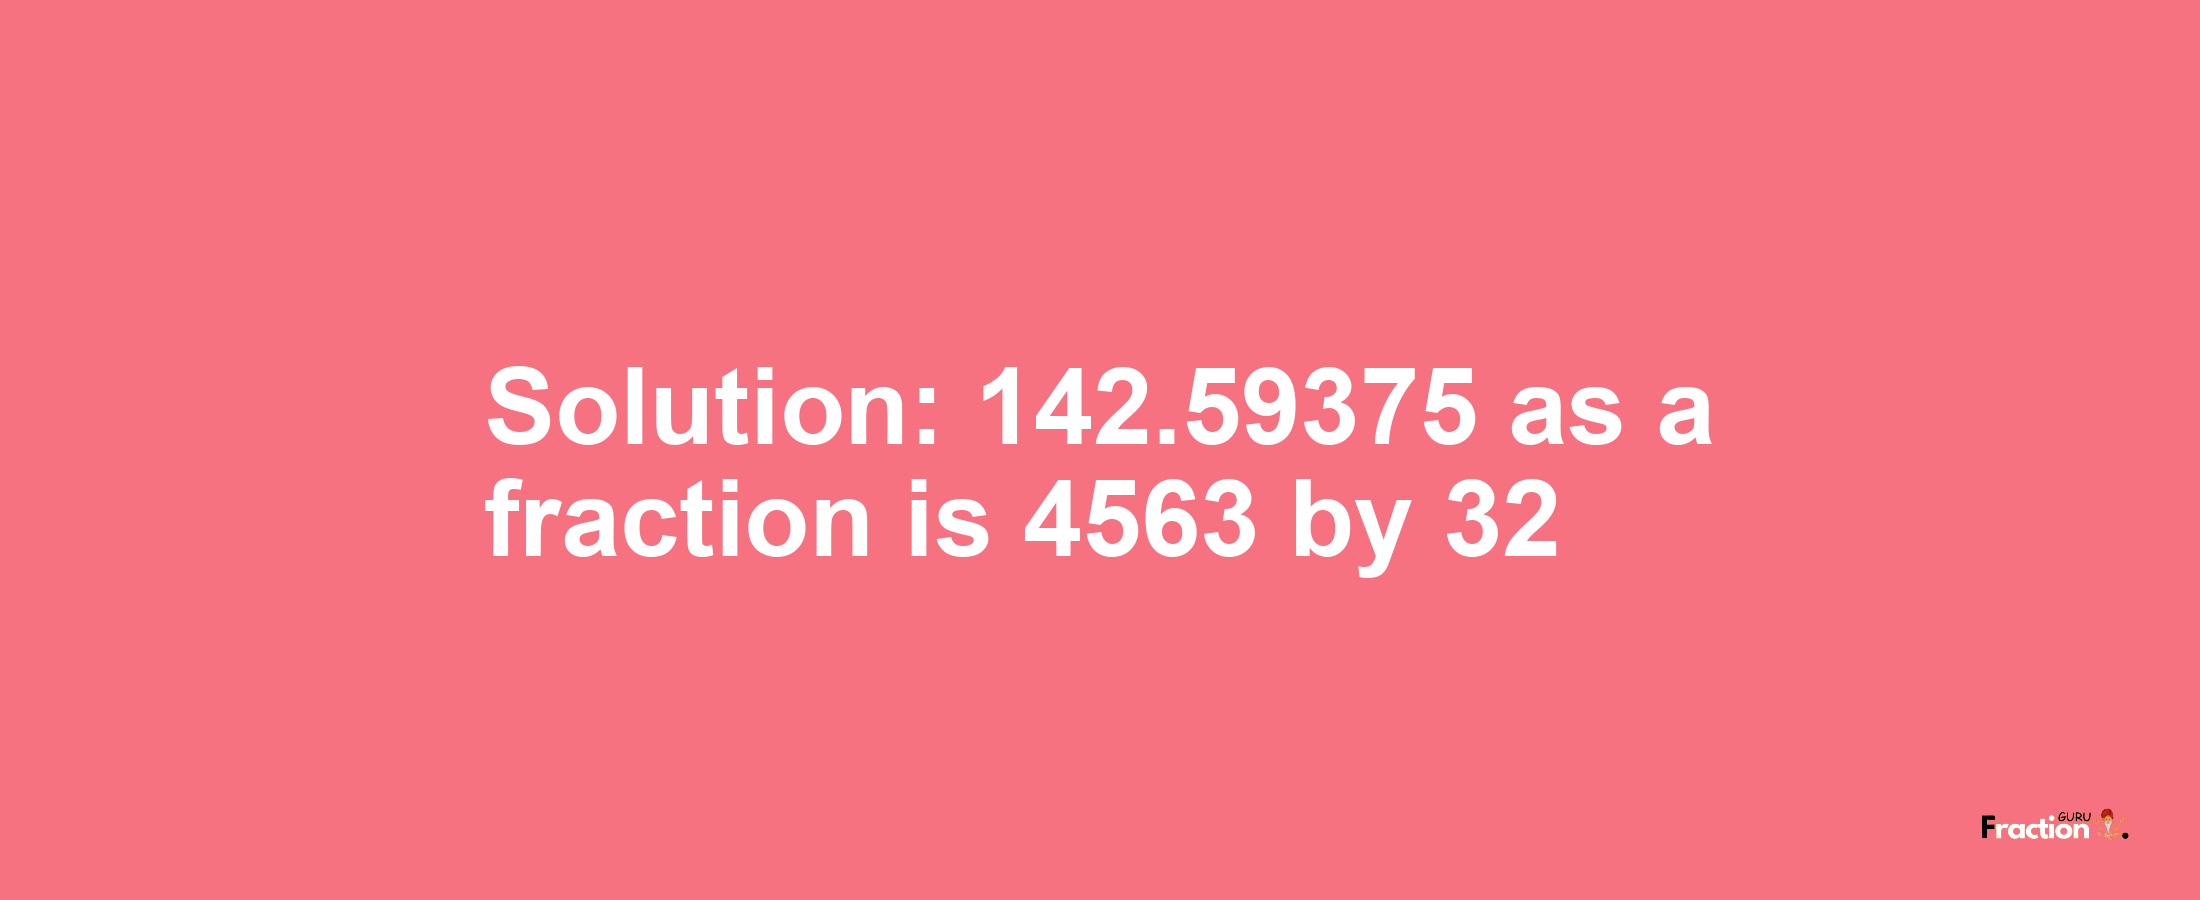 Solution:142.59375 as a fraction is 4563/32